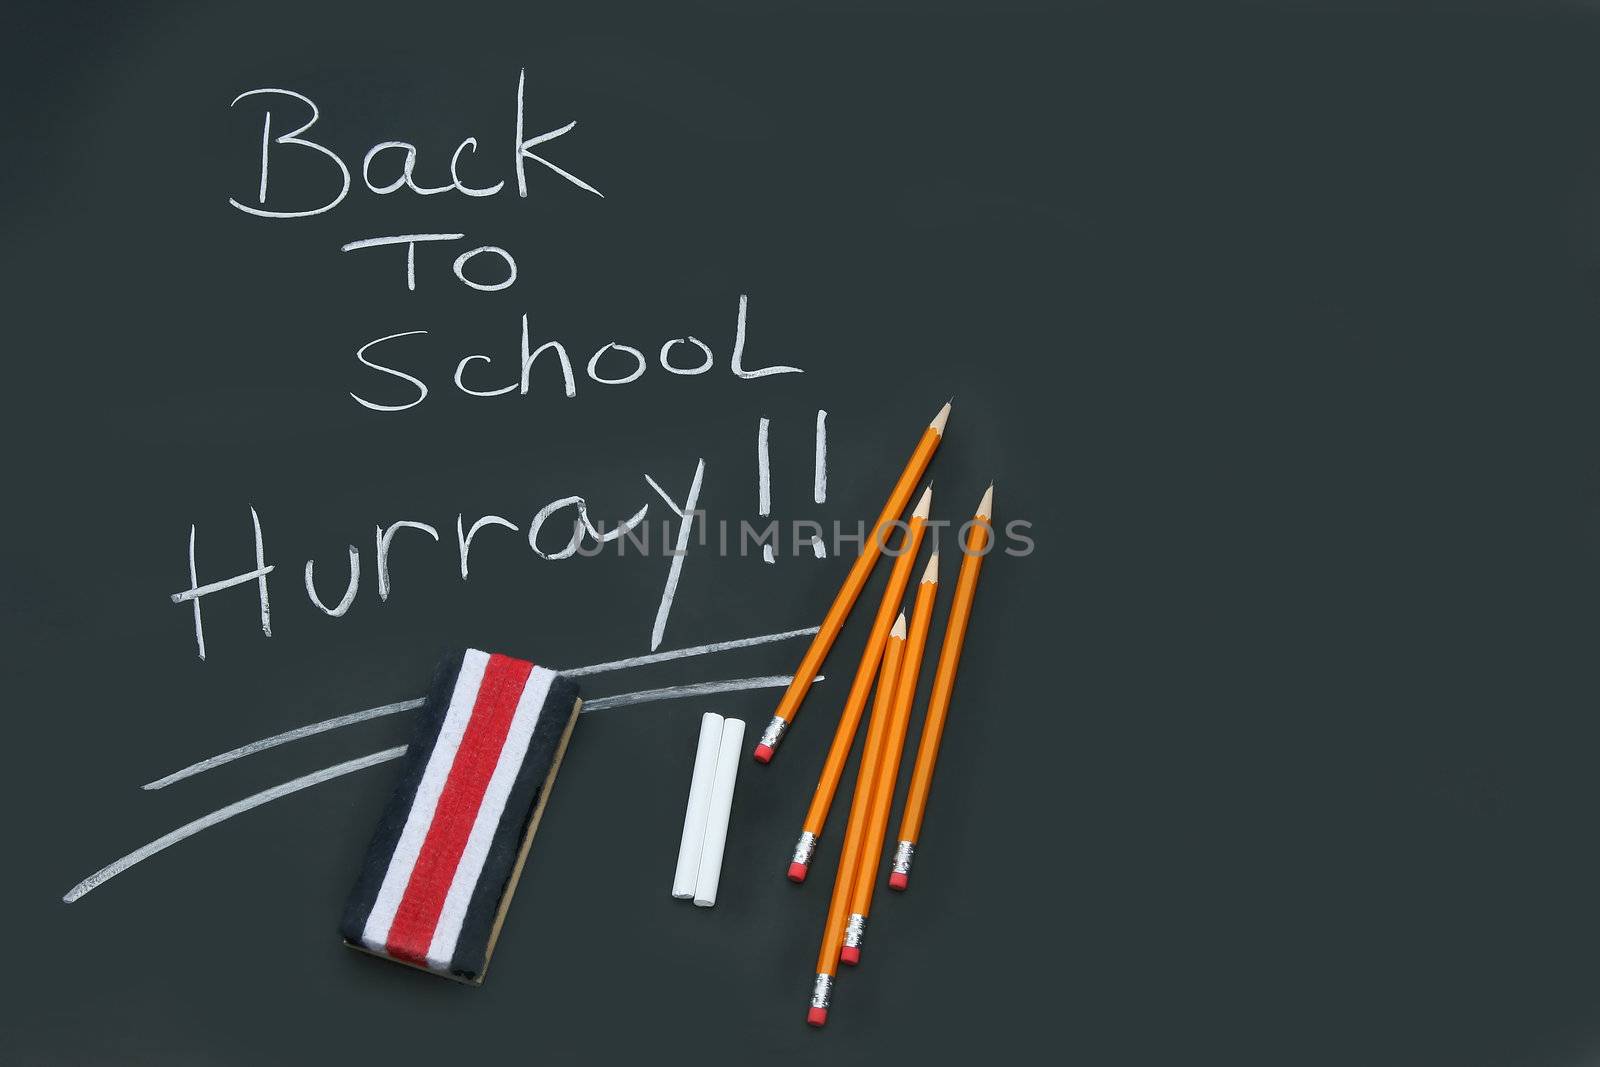 Back to school ..hurray! by Sandralise